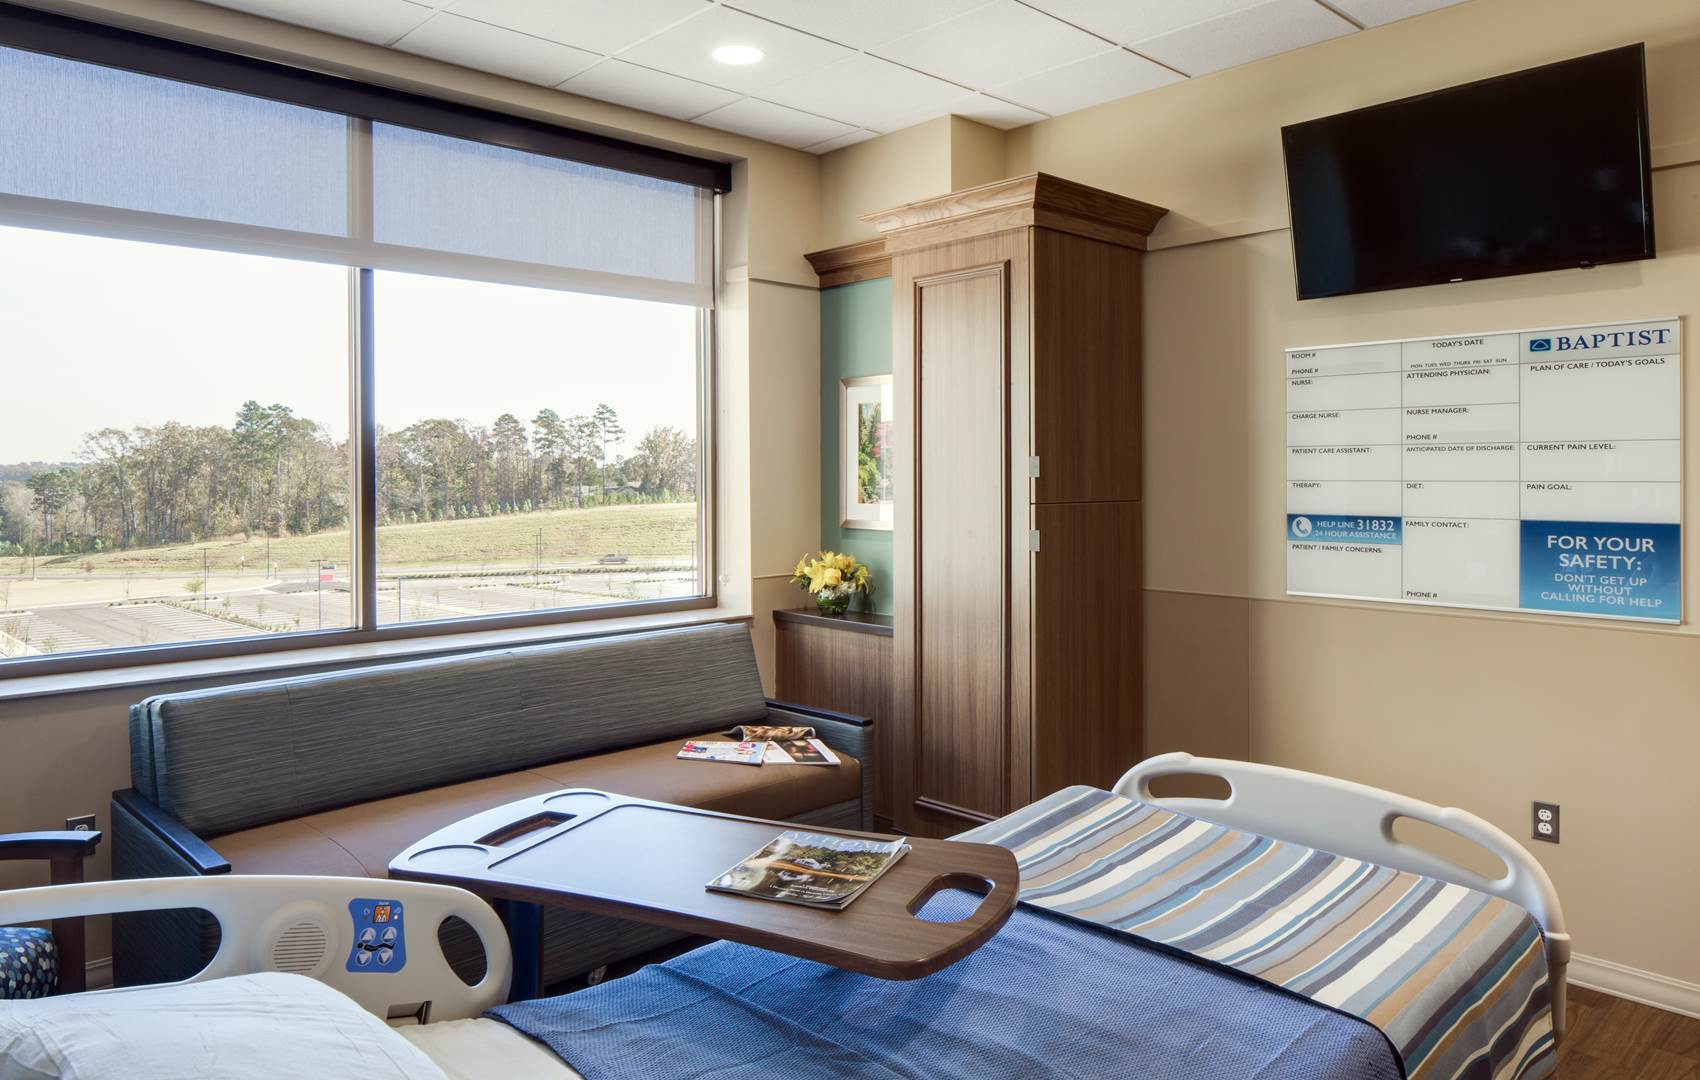 Patient room at Baptist Memorial Hospital in Oxford